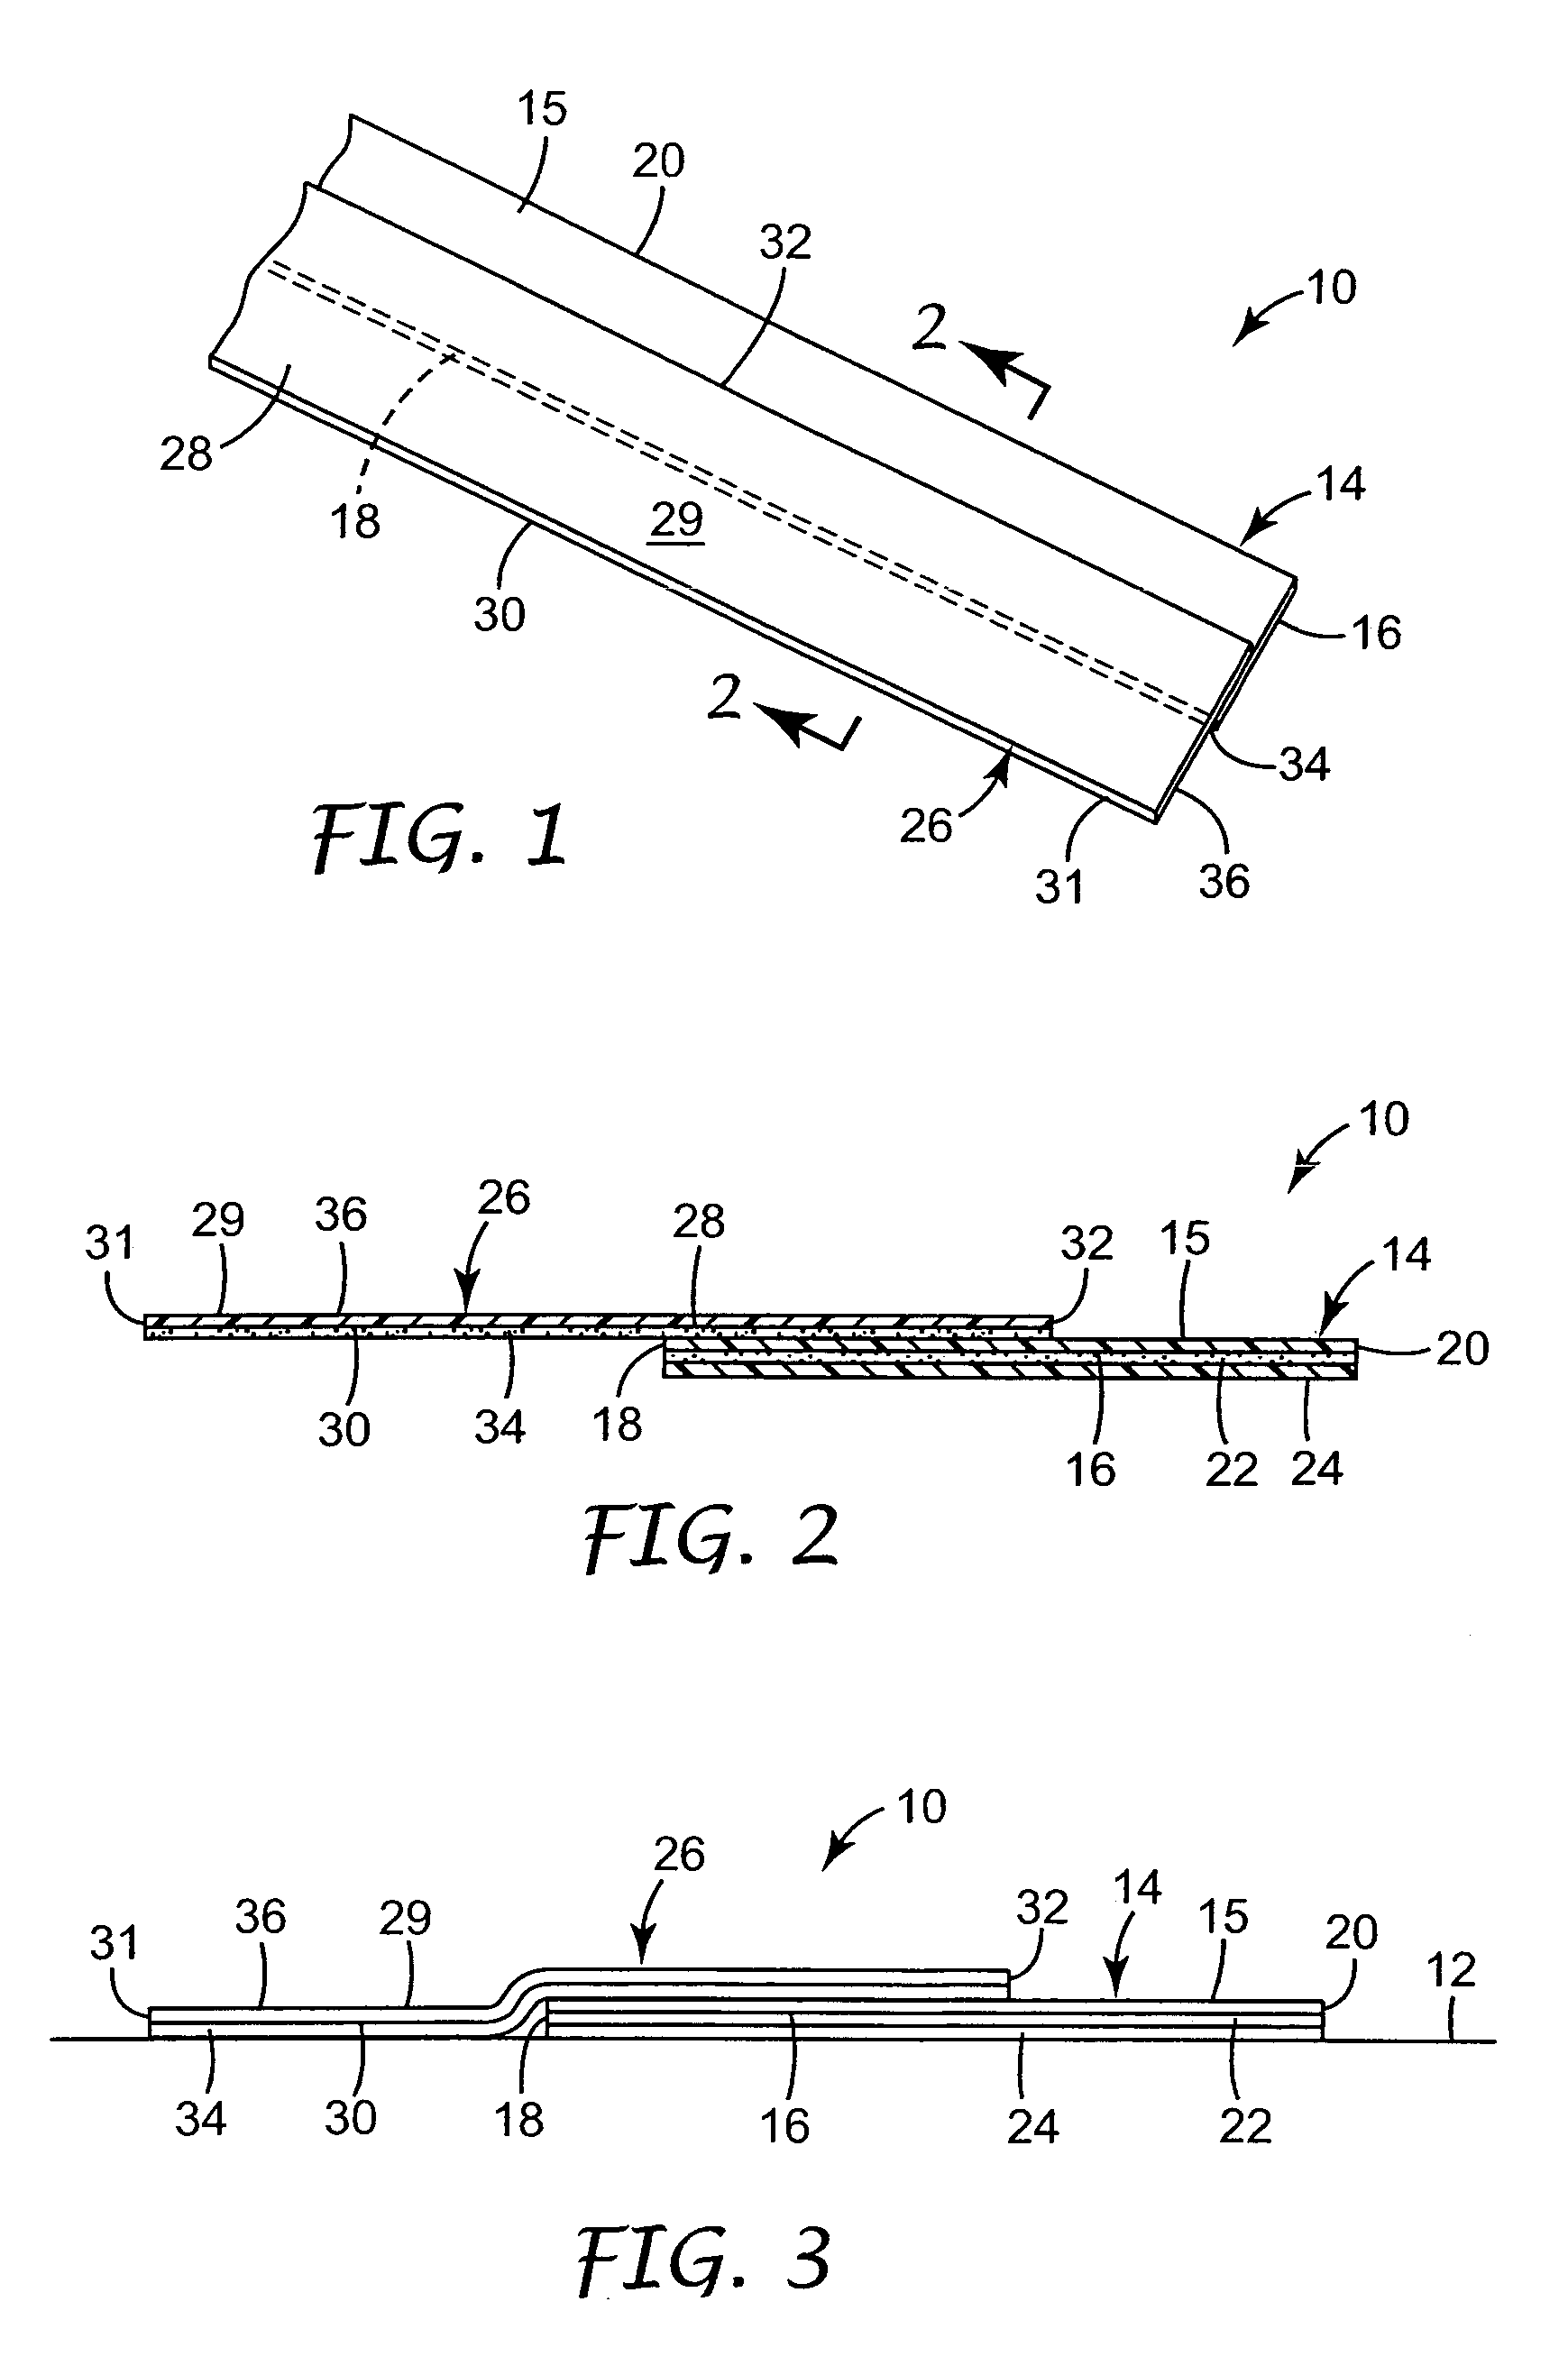 Laminate and method used for applying a design to a substrate